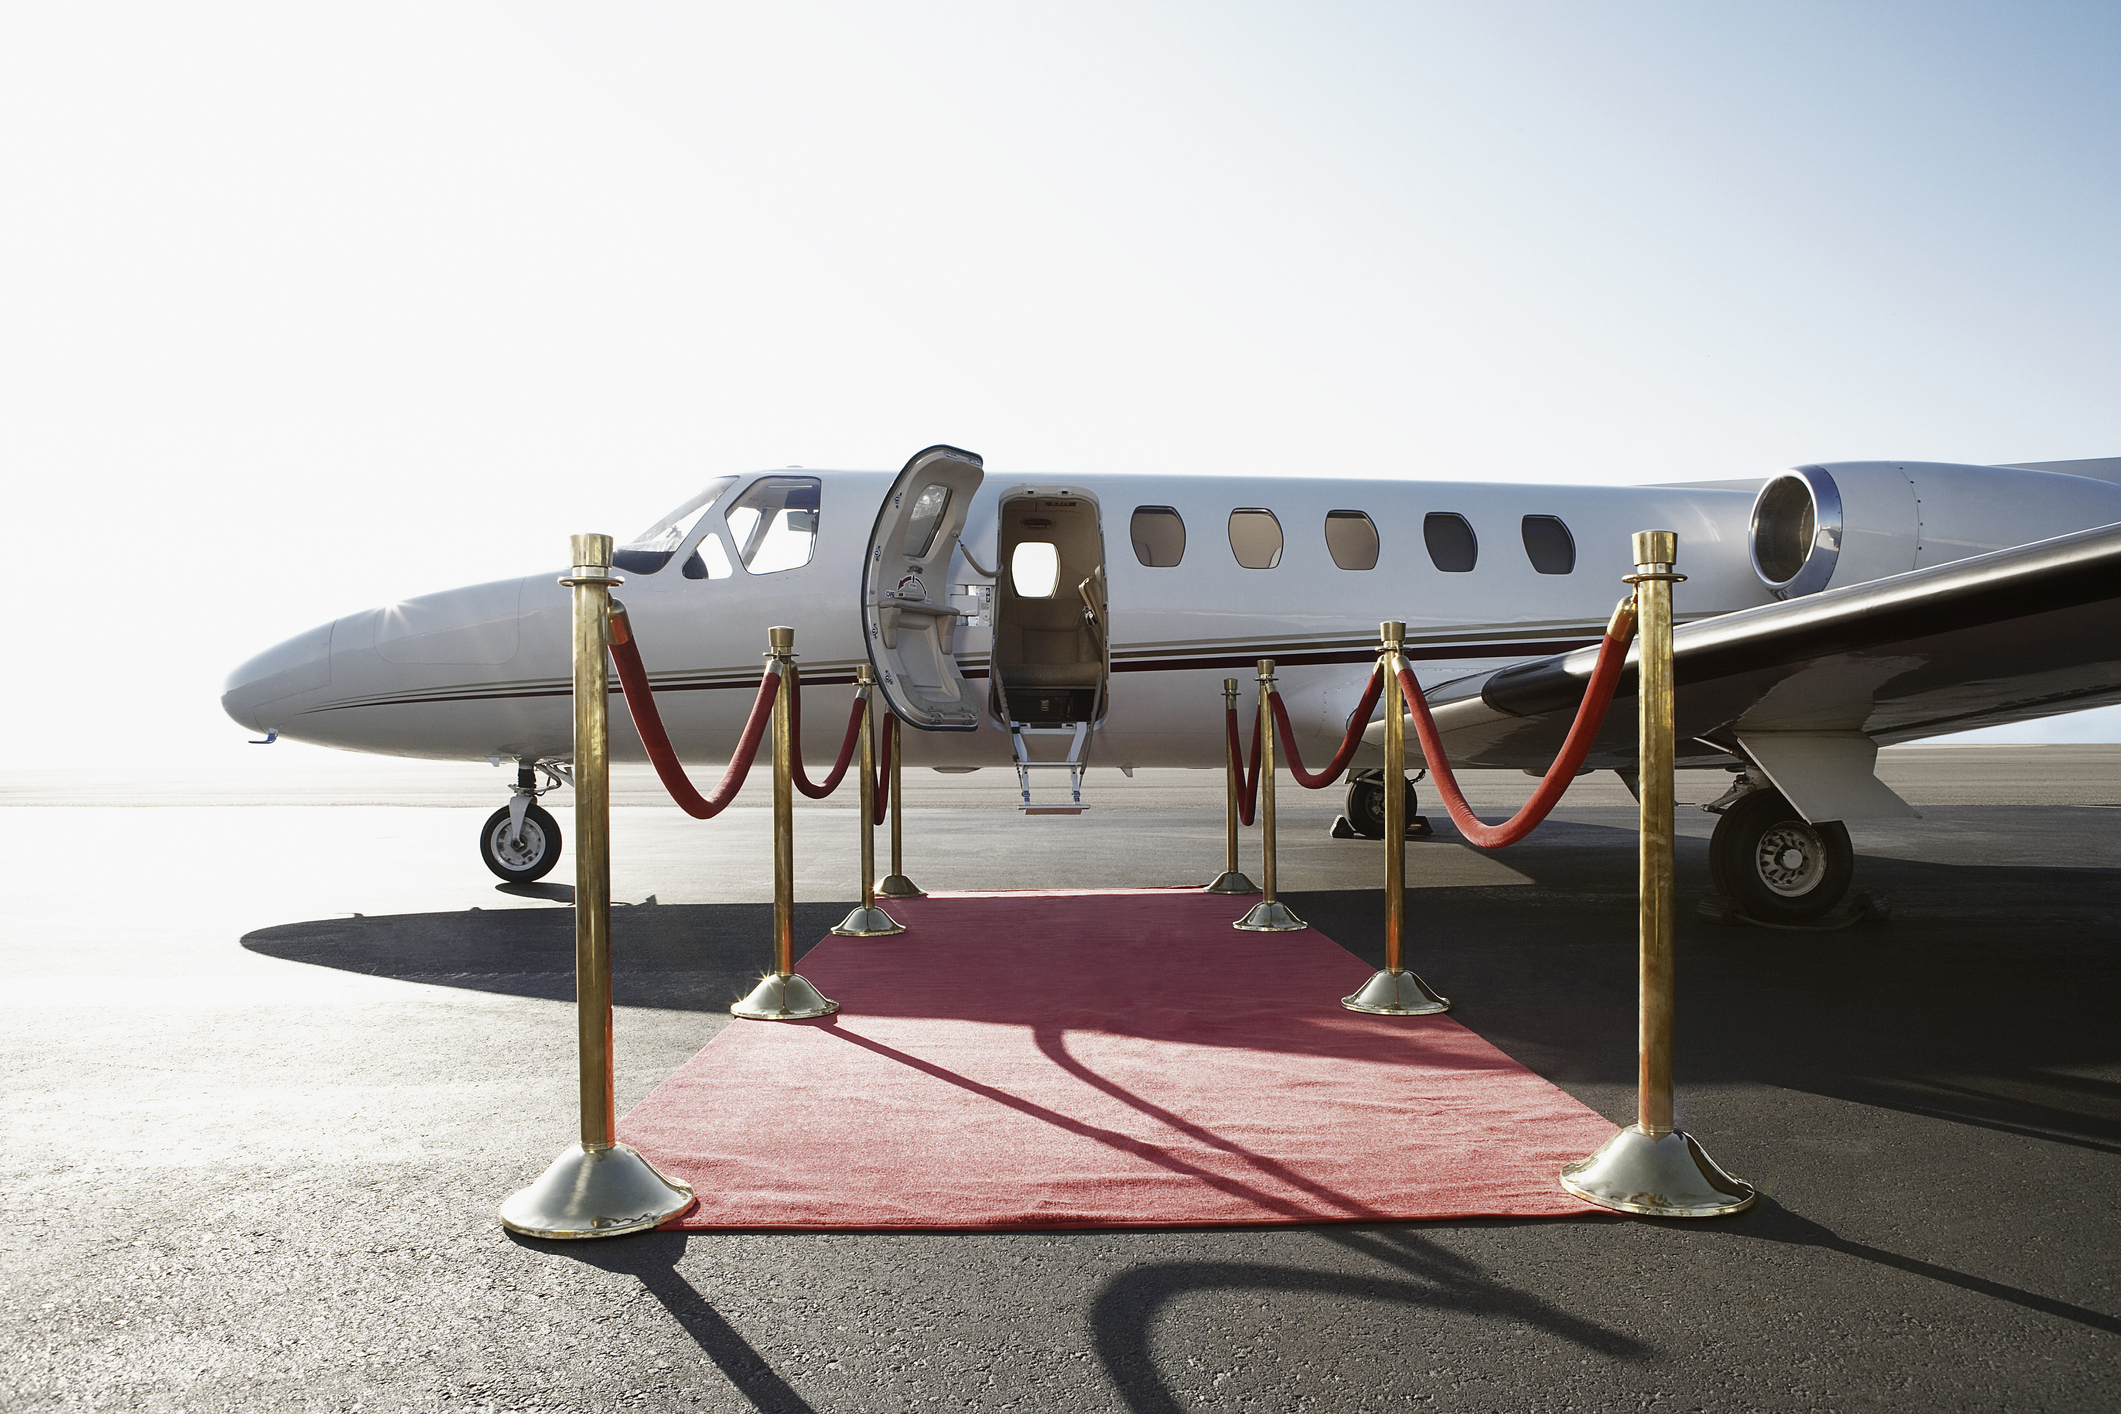 Social media buzzed over reports of wild private jet usage—celebrities taking flights so short that they could have driven in less than an hour. (Getty Images)